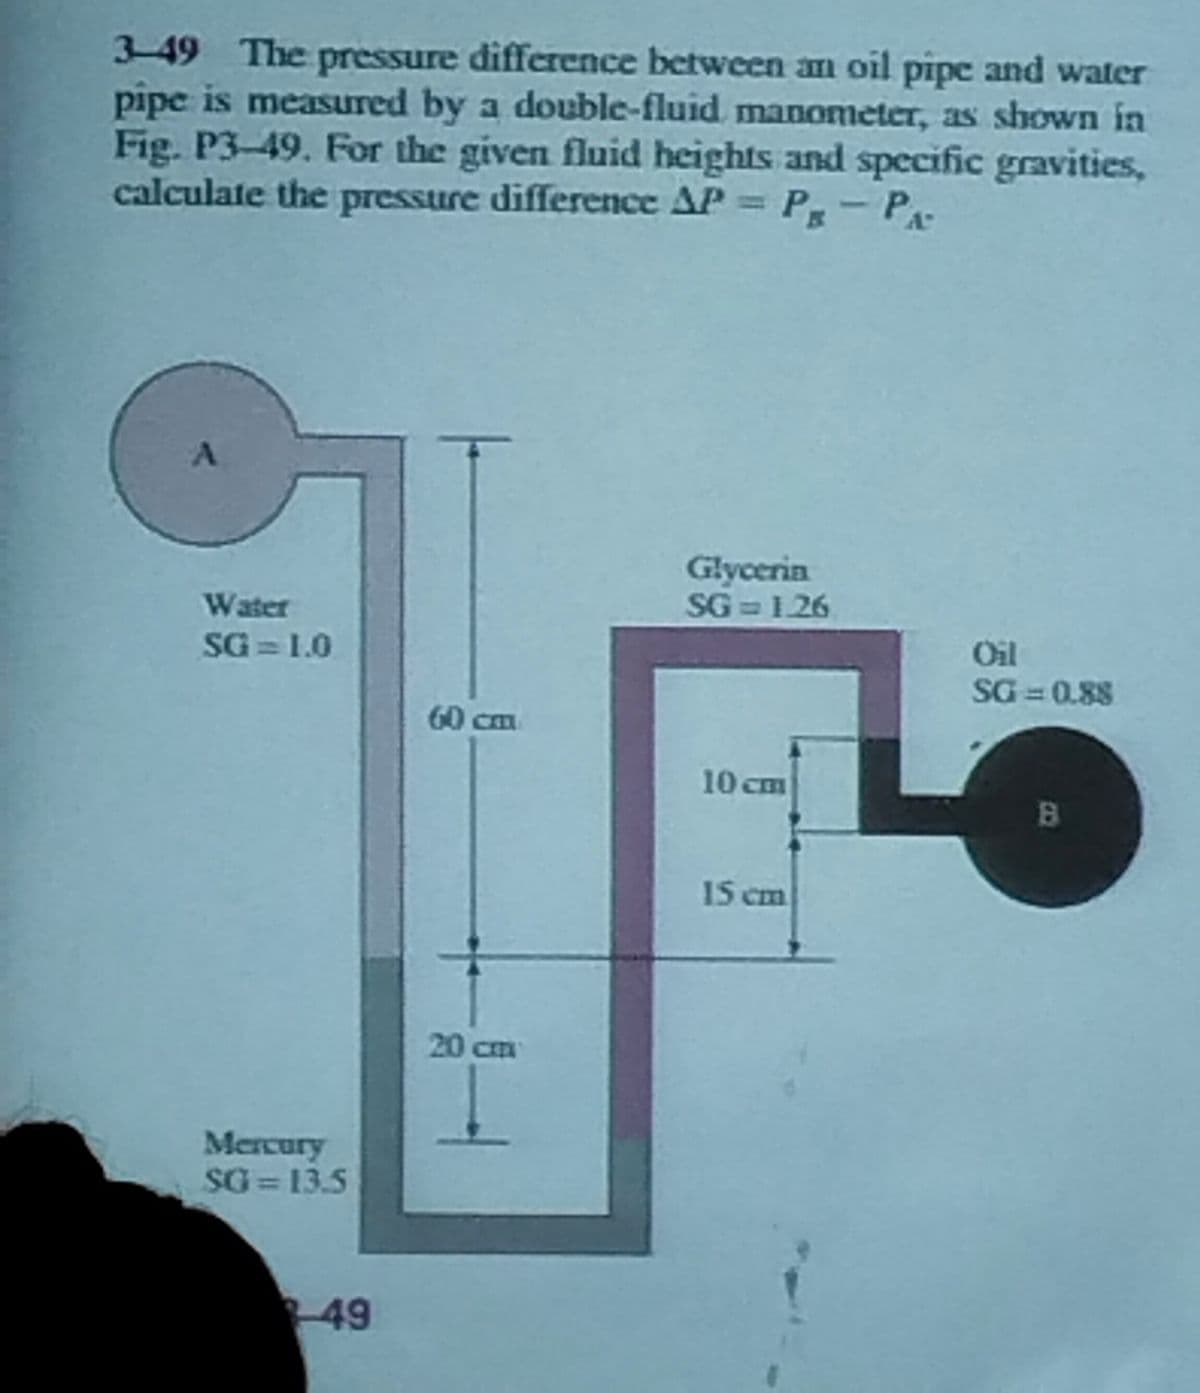 3-49 The pressure difference between an oil pipe and water
pipe is measured by a double-fluid manometer, as shown in
Fig. P3-49. For the given fluid heights and specific gravities,
calculate the pressure difference AP = PR - PA
A
Water
SG = 1.0
Mercury
SG=13.5
-49
60 cm
20 cm
Glycerin
SG=1.26
10 cm
15 cm
Oil
SG=0.88
B